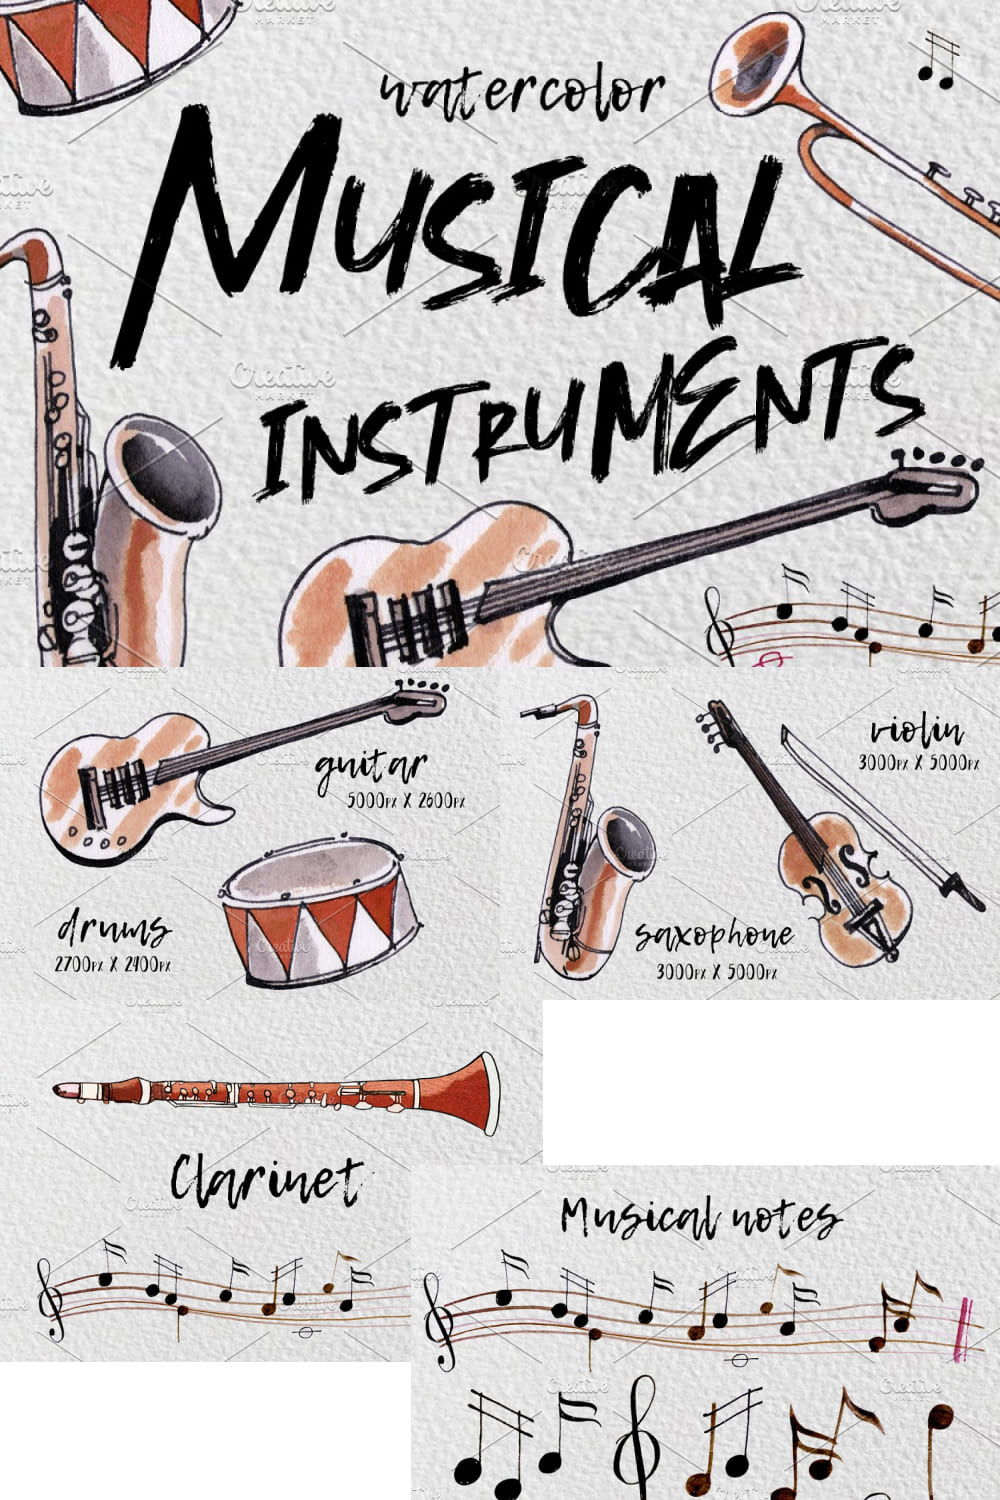 Collection of beautiful images of musical instruments.